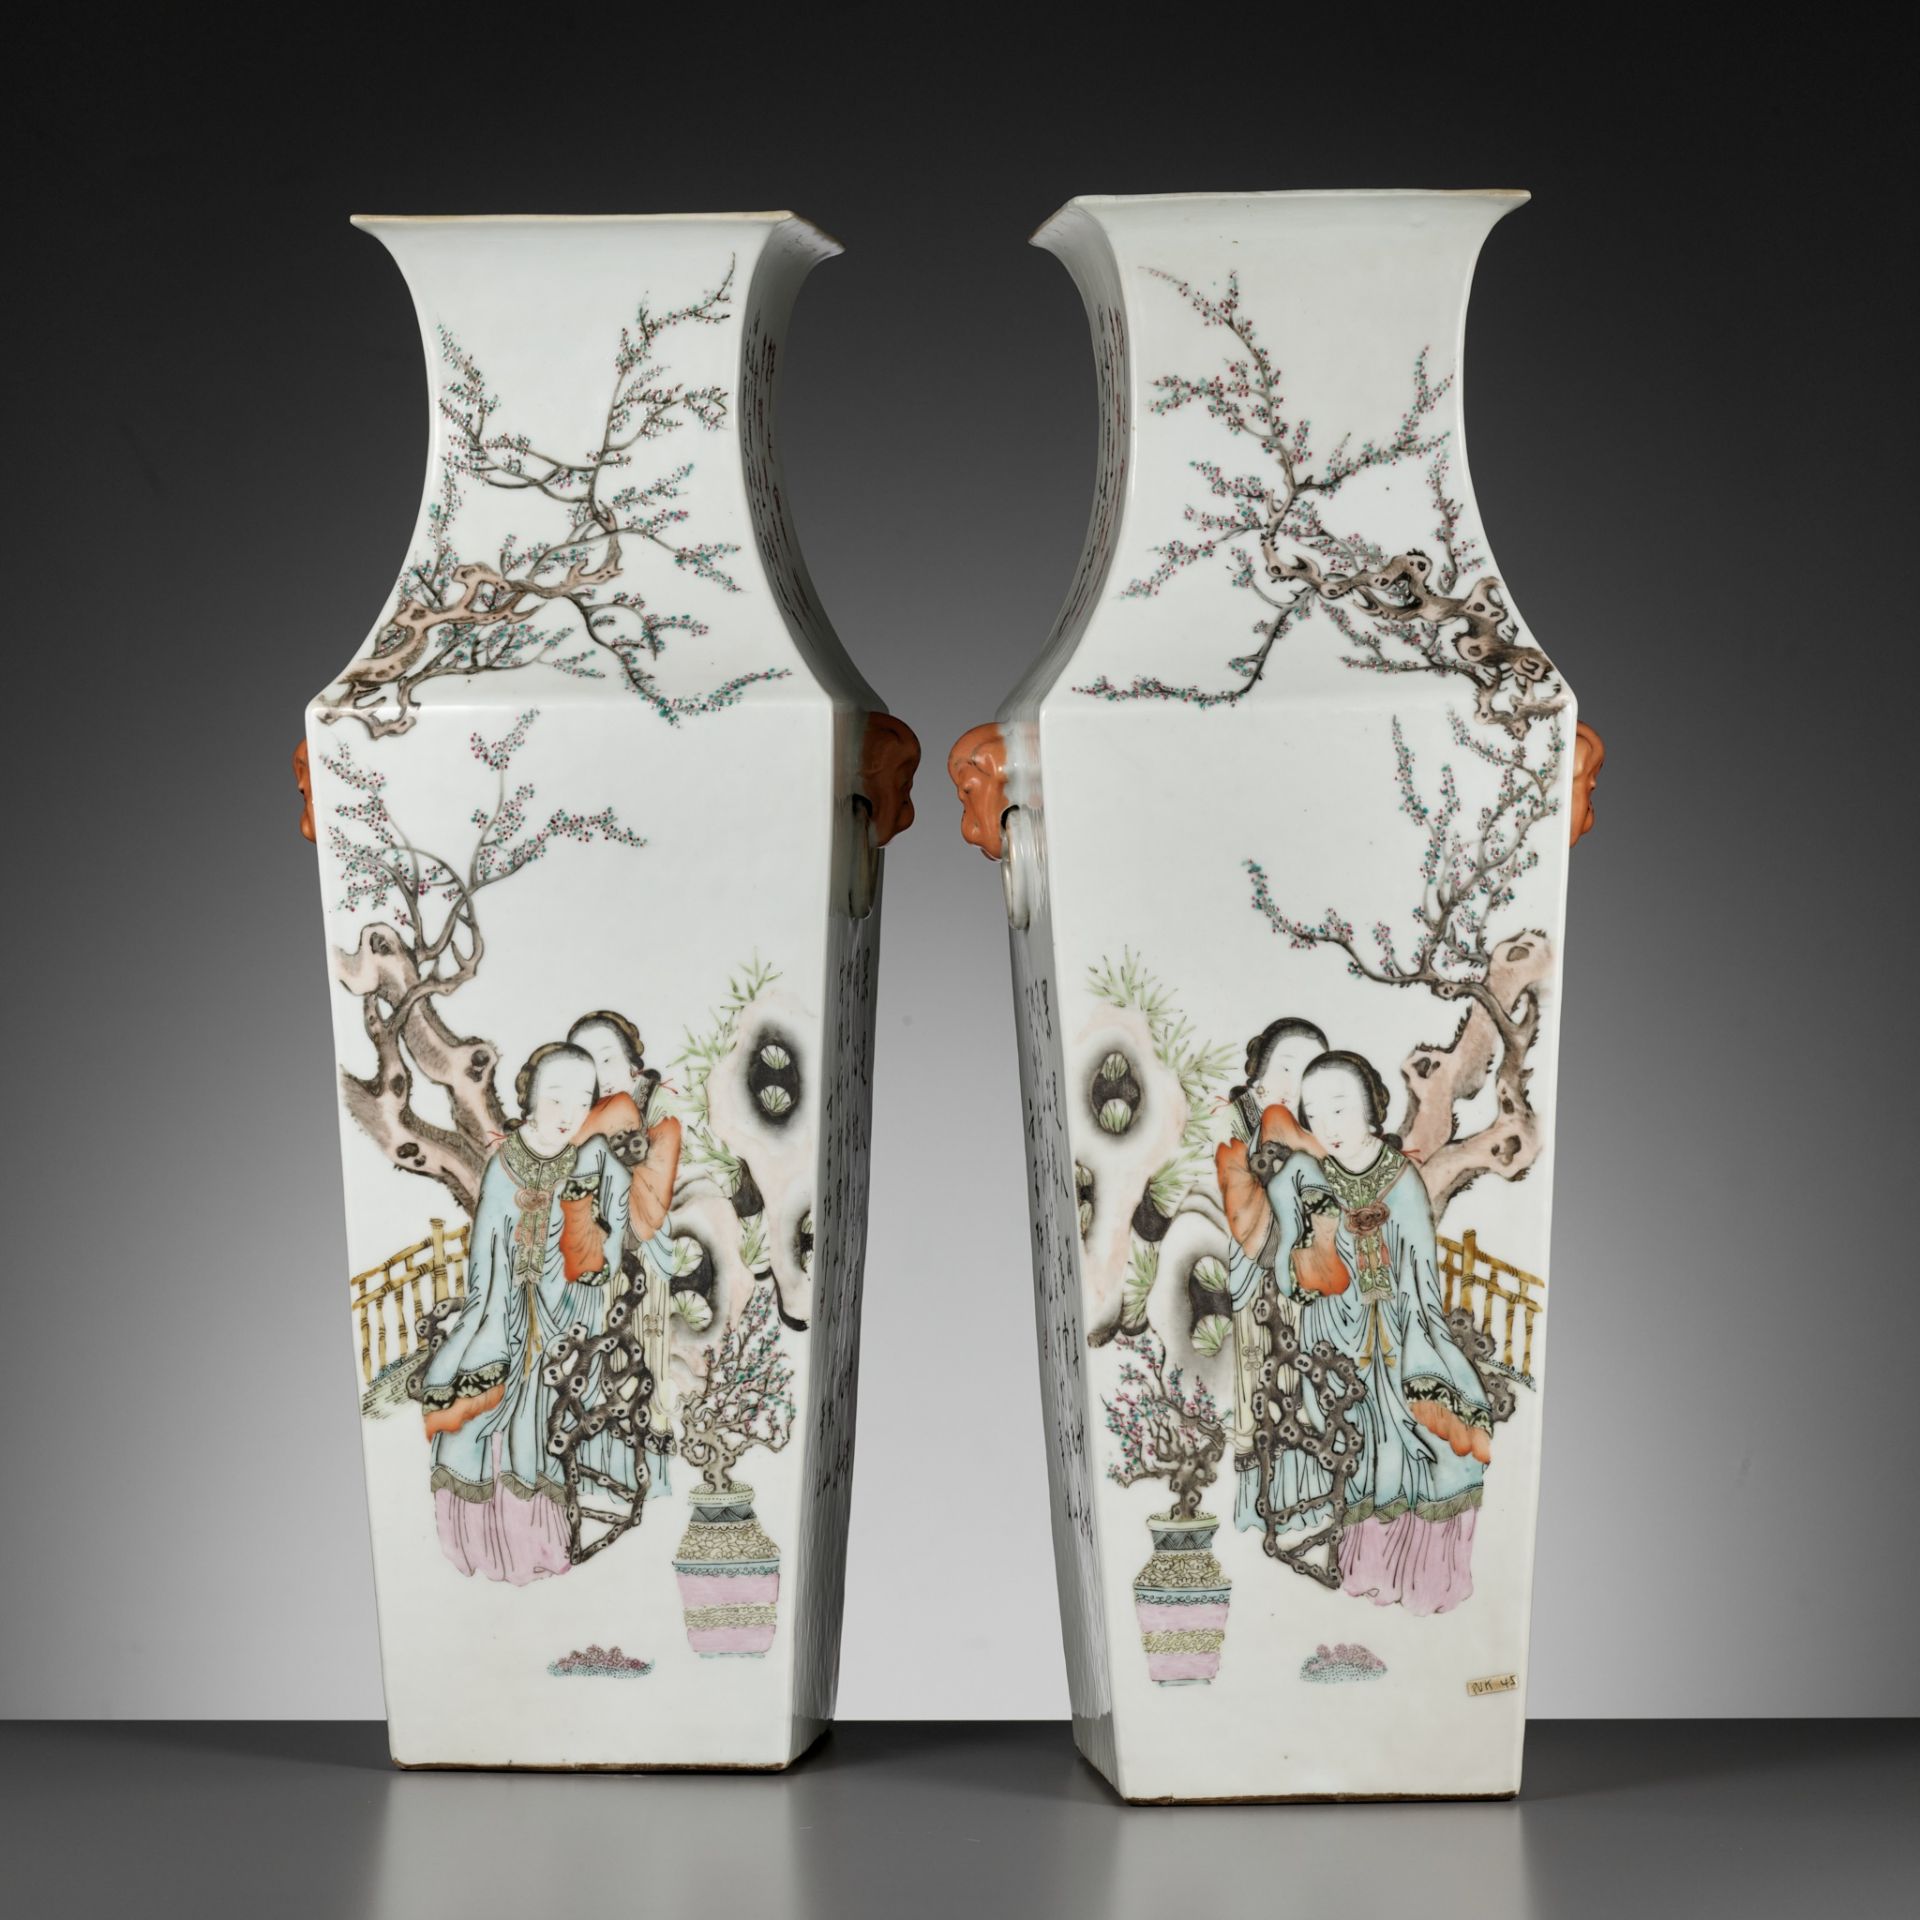 A PAIR OF LARGE QIANJIANG CAI VASES, BY FANG JIAZHEN, CHINA, DATED 1895